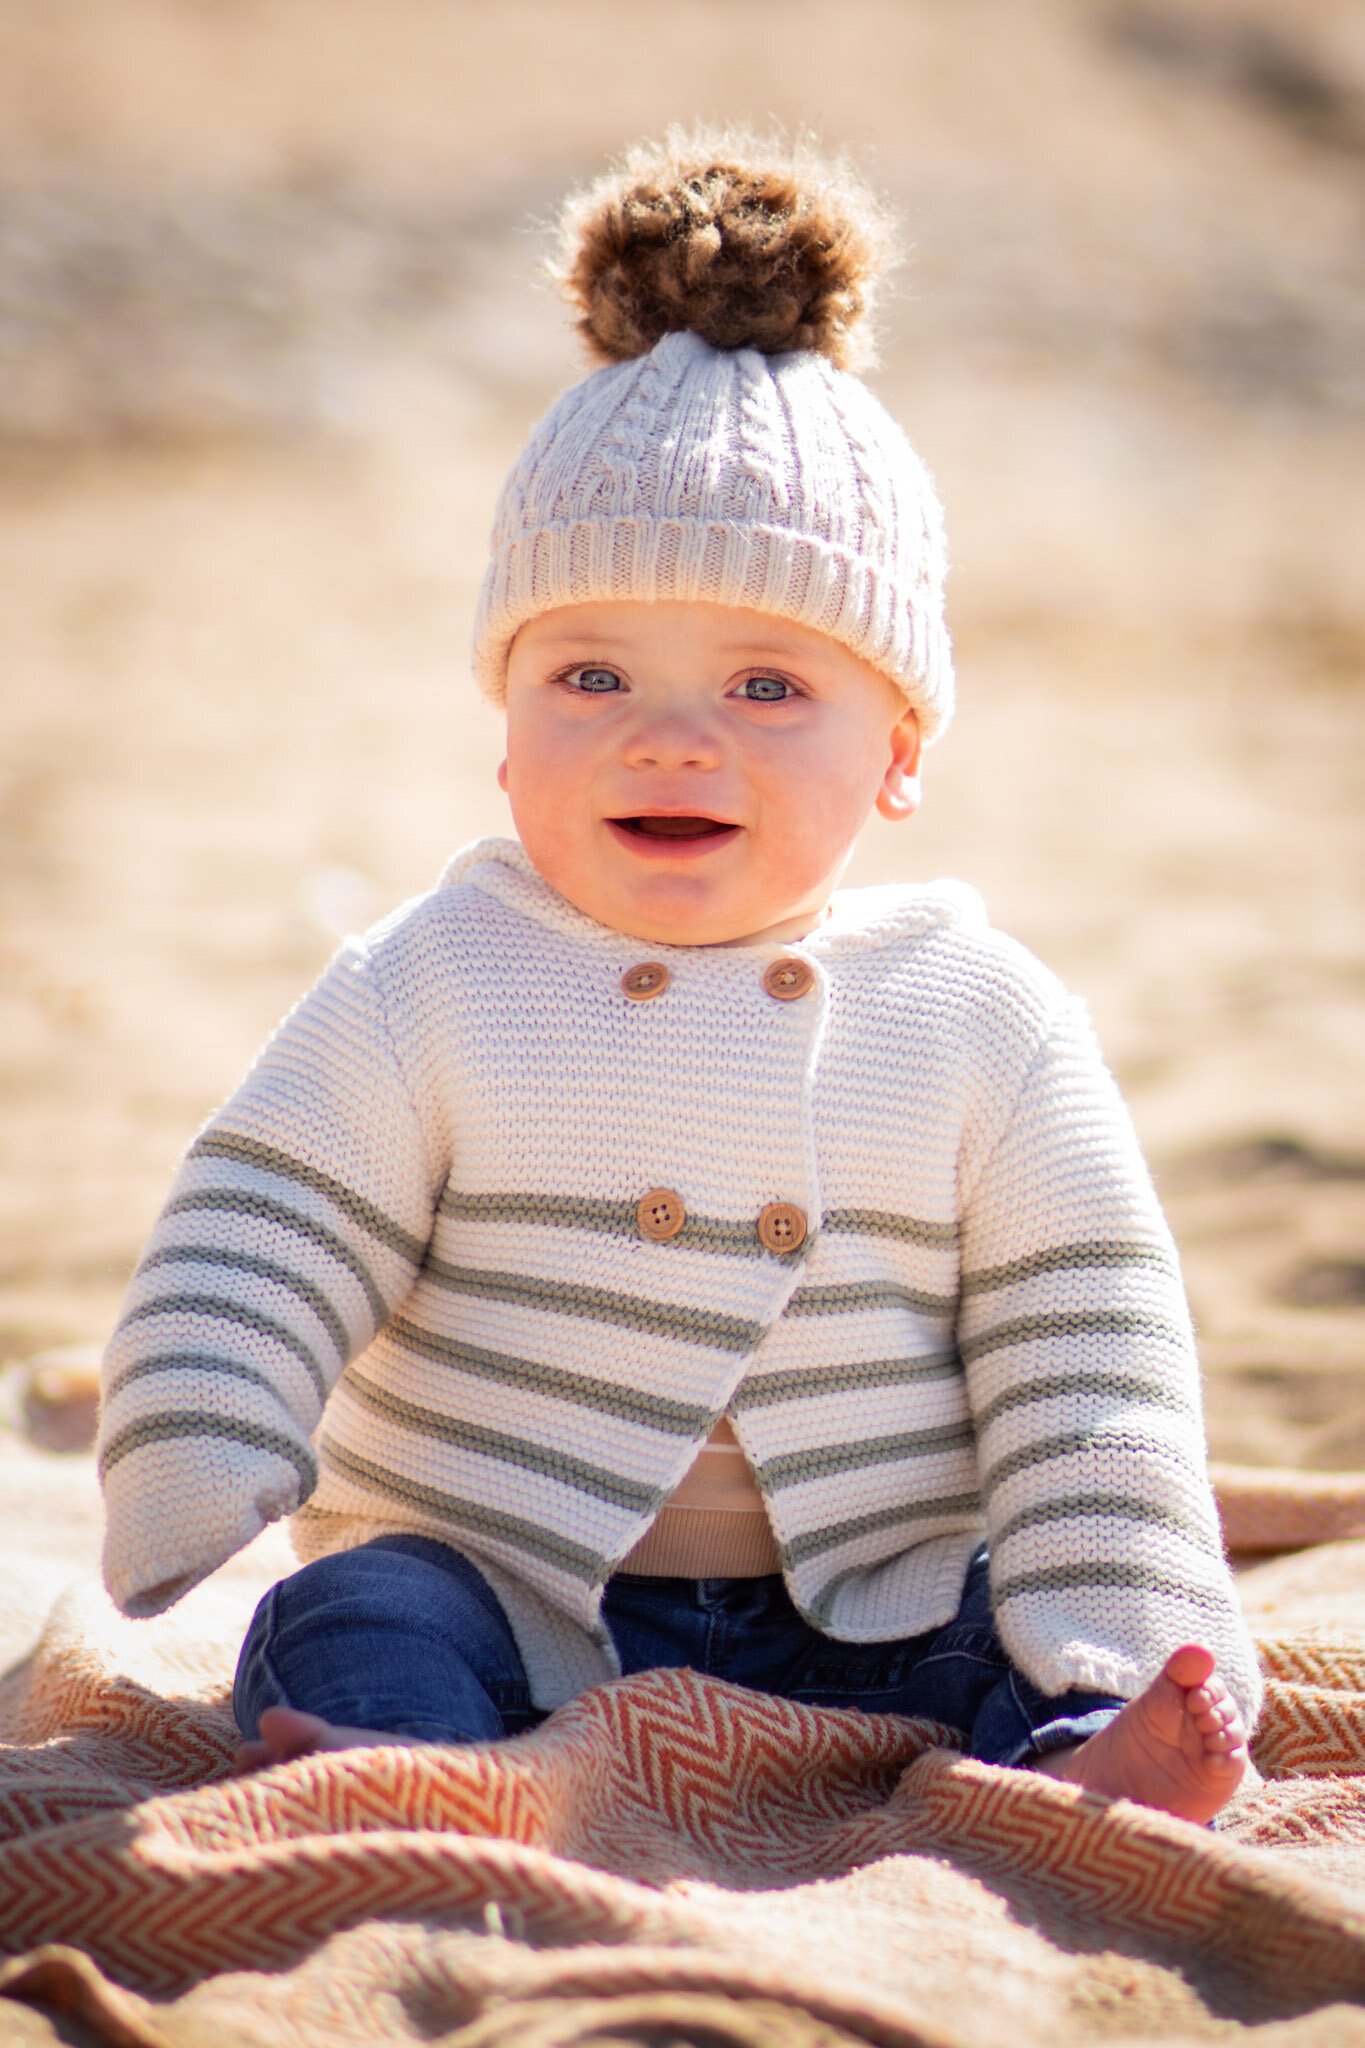 Baby sits on a blanket at the beach smiling at the camera